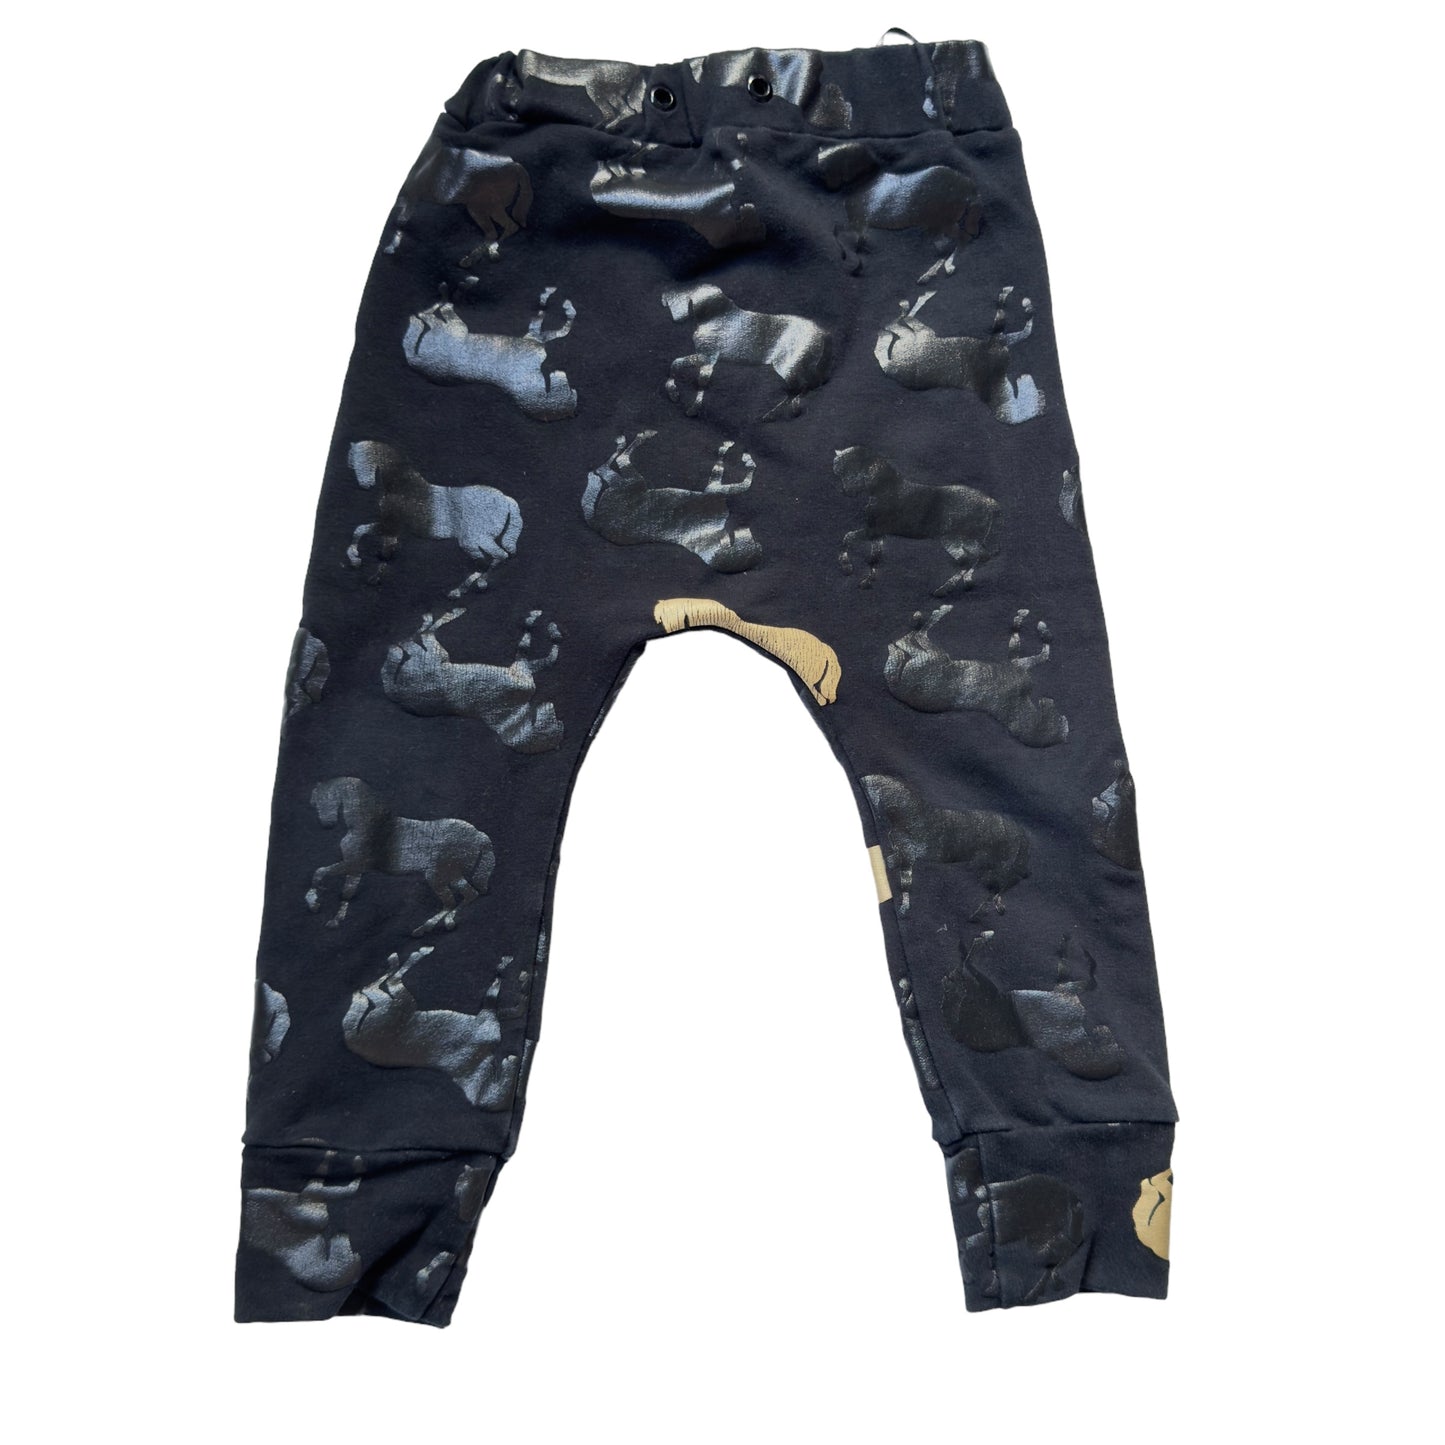 Carbon Soldier hooded pant | black and gold horse print | 3 years | GUC